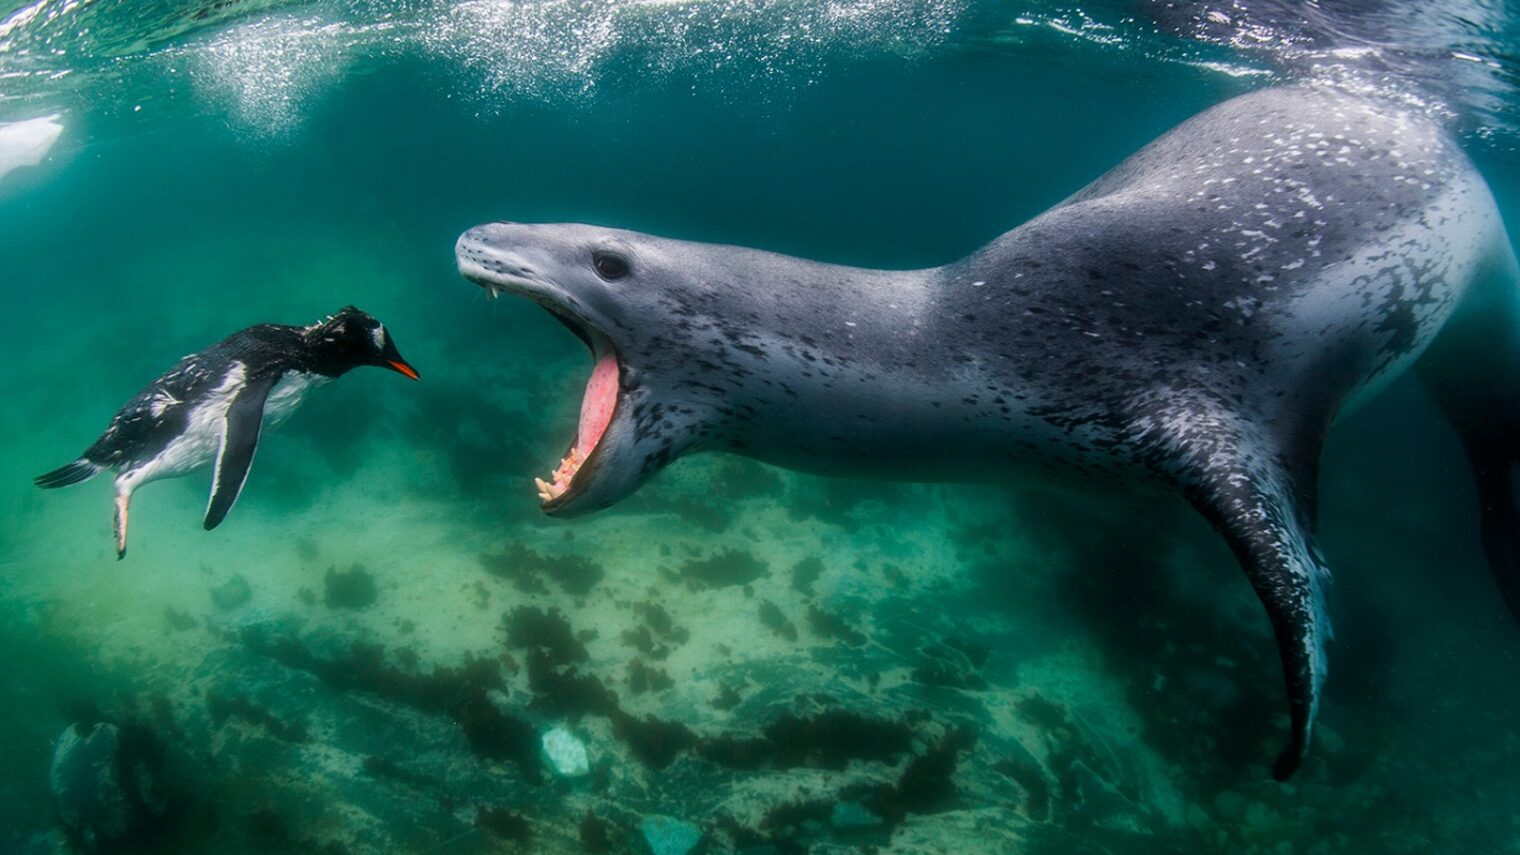 This picture of a leopard seal preying on a penguin was named Best of Show in 2012 by the American Photographic Artists Awards. Photo © Amos Nachoum